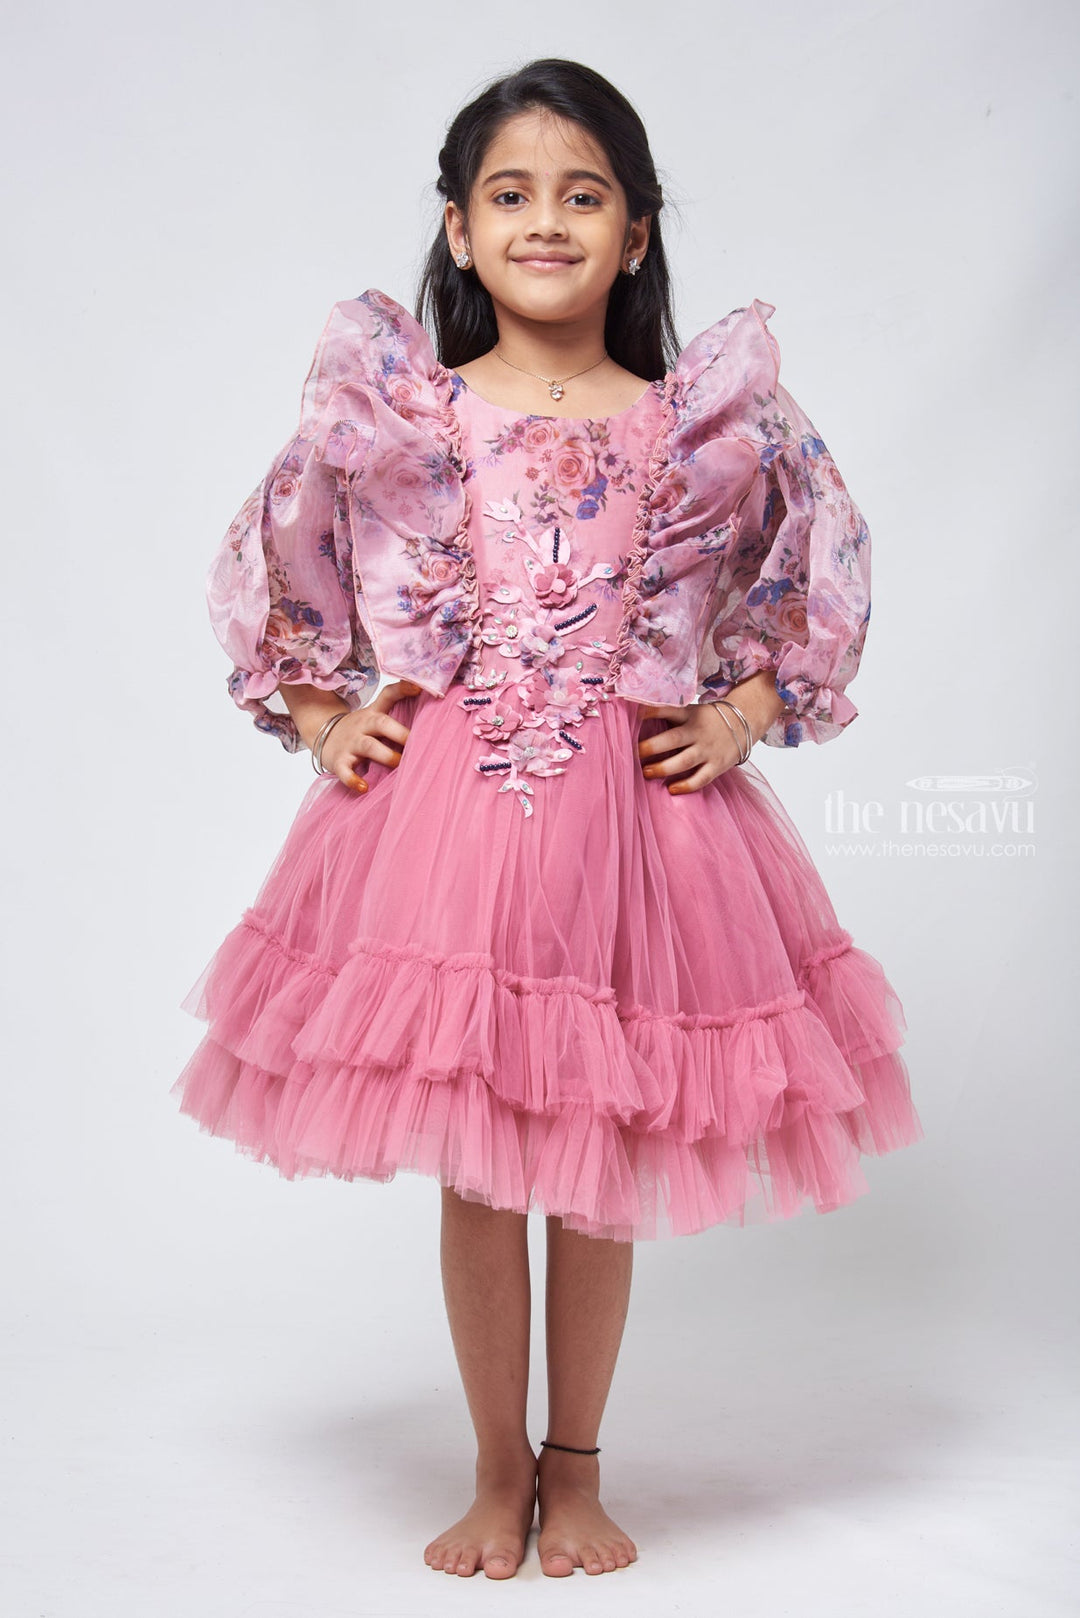 The Nesavu Girls Tutu Frock Girls Chic Frock Perfect for Special Occasions and Celebrations Nesavu 16 (1Y) / Pink / Organza Printed PF127A-16 Fancy Dress For 3 Years Birthday | Party Dresses For Little Girls | The Nesavu